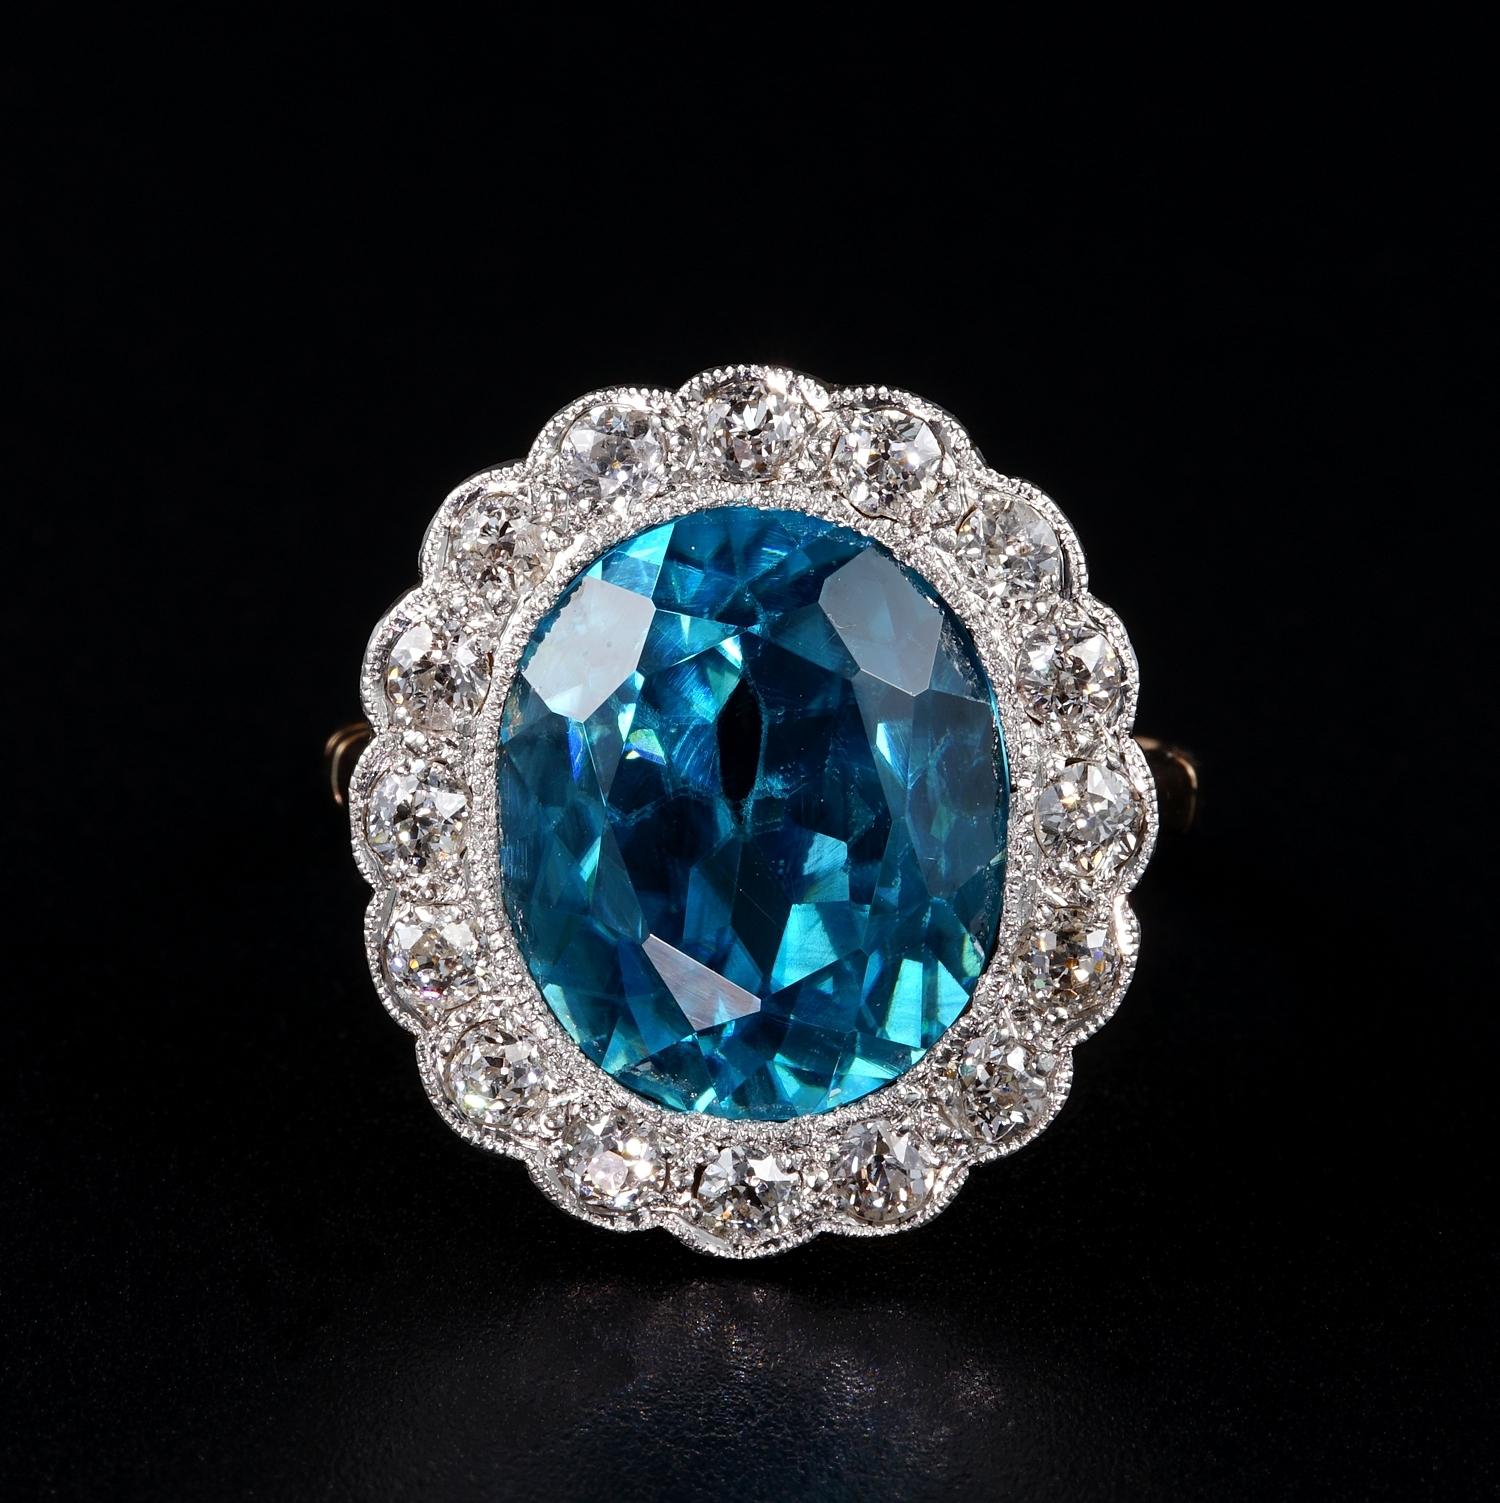 True Love!
True love is what you will feel for this ring on the first sight
Stunning, mesmerizing, top quality, rare era, all facts that will make conscious of having one of the finest ever of this type
Edwardian pure beauty natural Blue Zircon